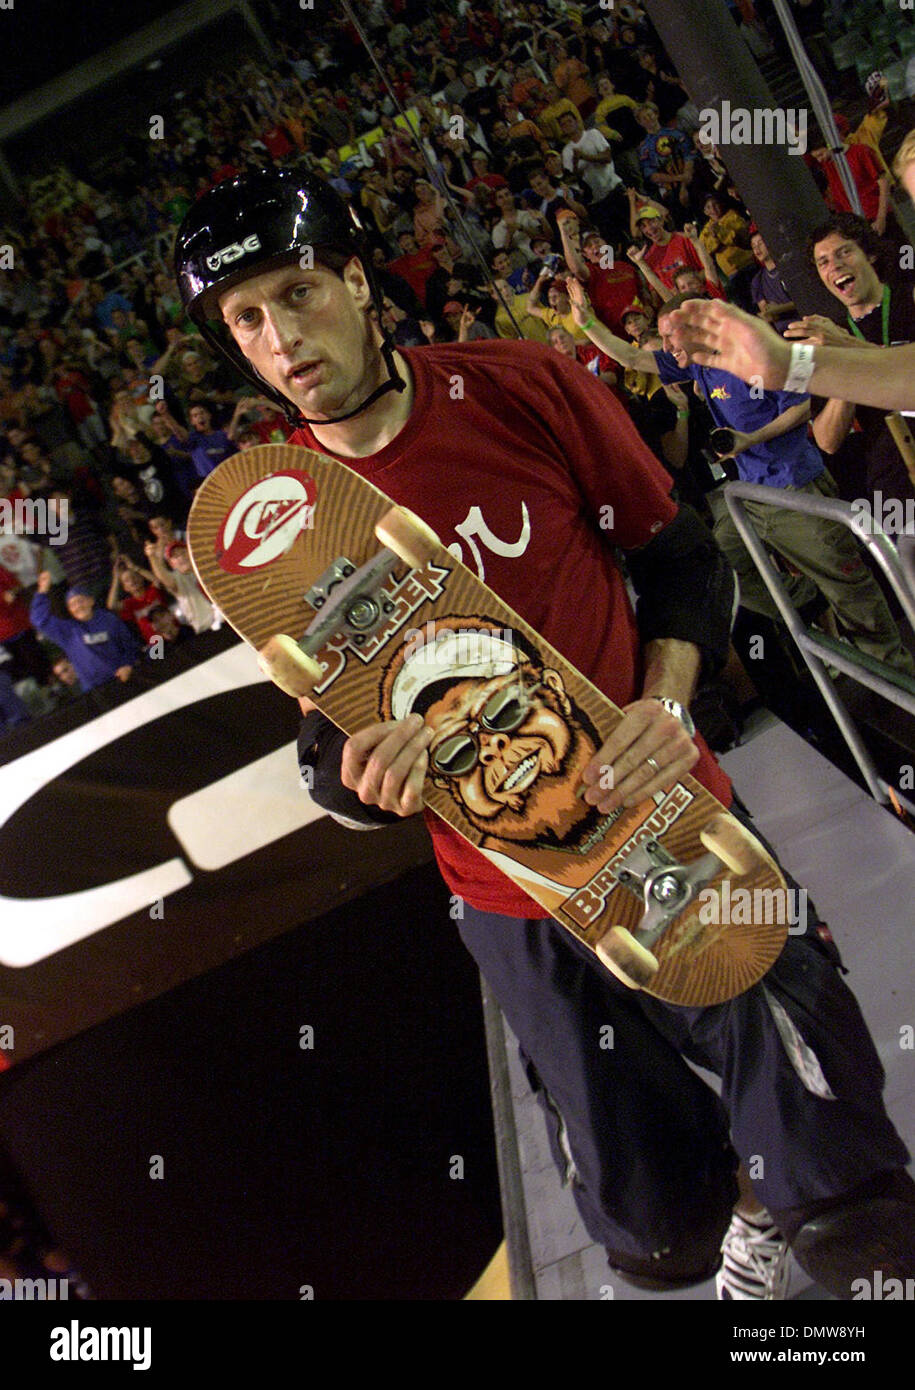 Feb 17, 2002; Rod Laver Stadium, Melbourne, AUSTRALIA; Legendary  skateboarder TONY HAWK successfully completed his 900 degree trick @ the  Globe World Cup, one of the biggest skateboarding events in the world